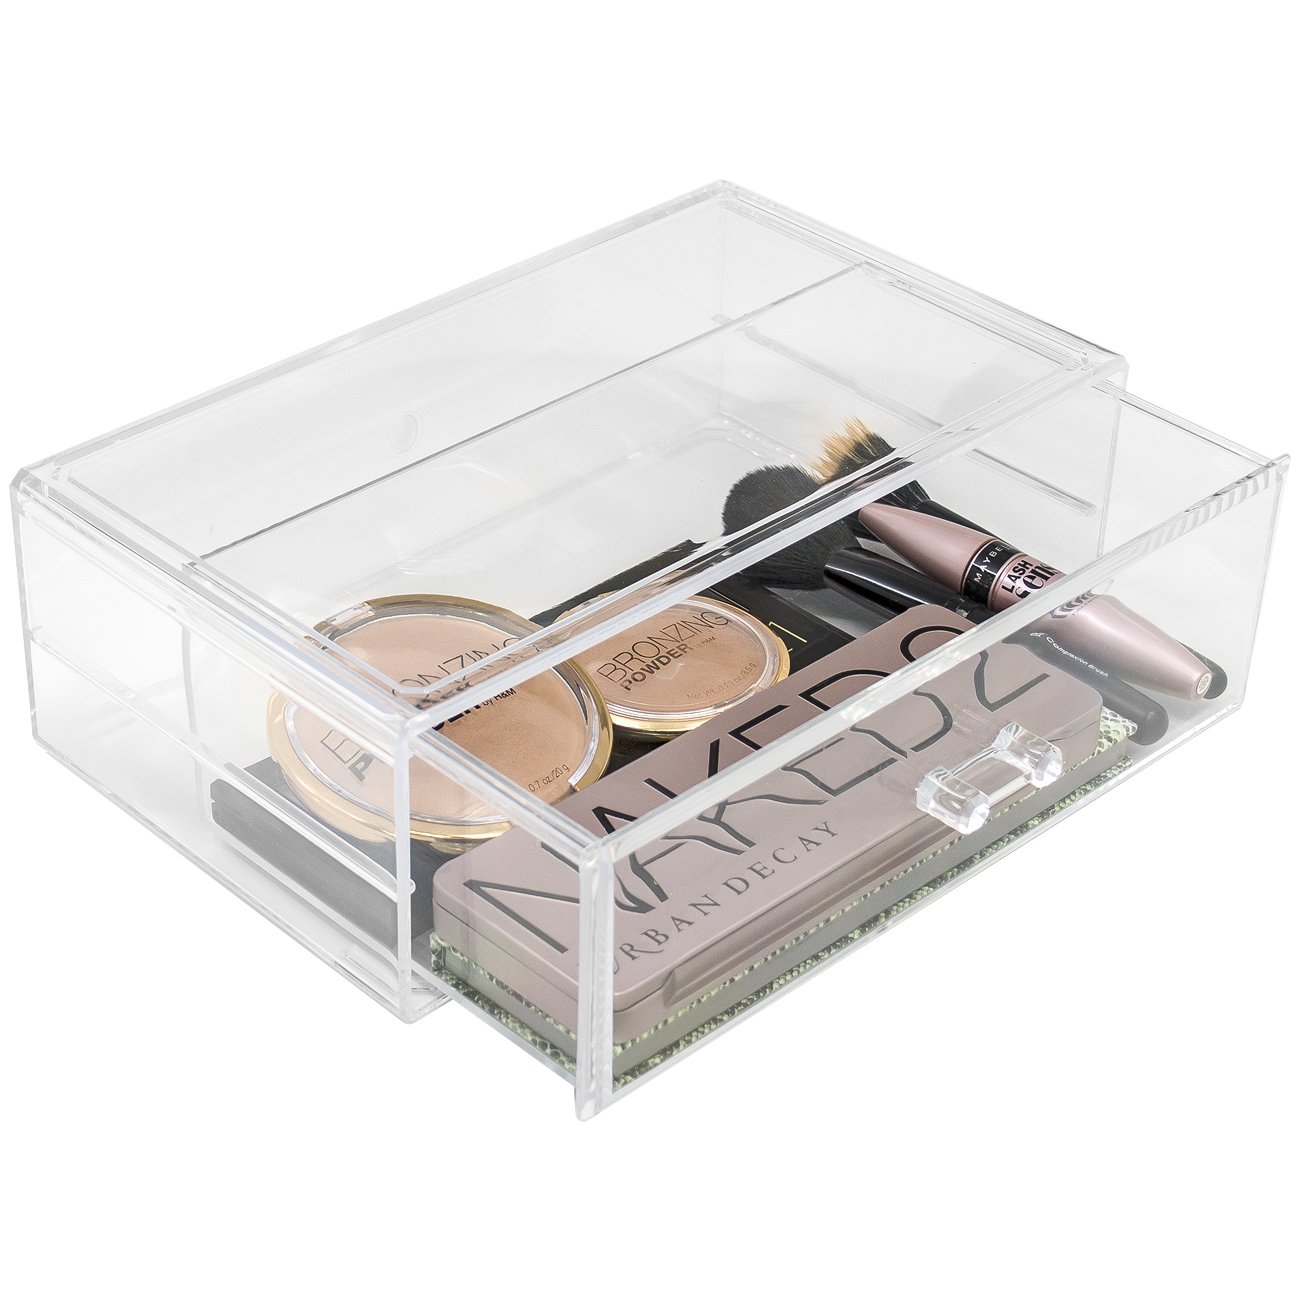 Sorbus Clear Acrylic Makeup Organizers - Stackable Jewelry, Makeup & Cosmetic Organizers and Storage with Acrylic Drawers - Great Bathroom Organizer & Display Set for Vanity, Dresser & Countertop